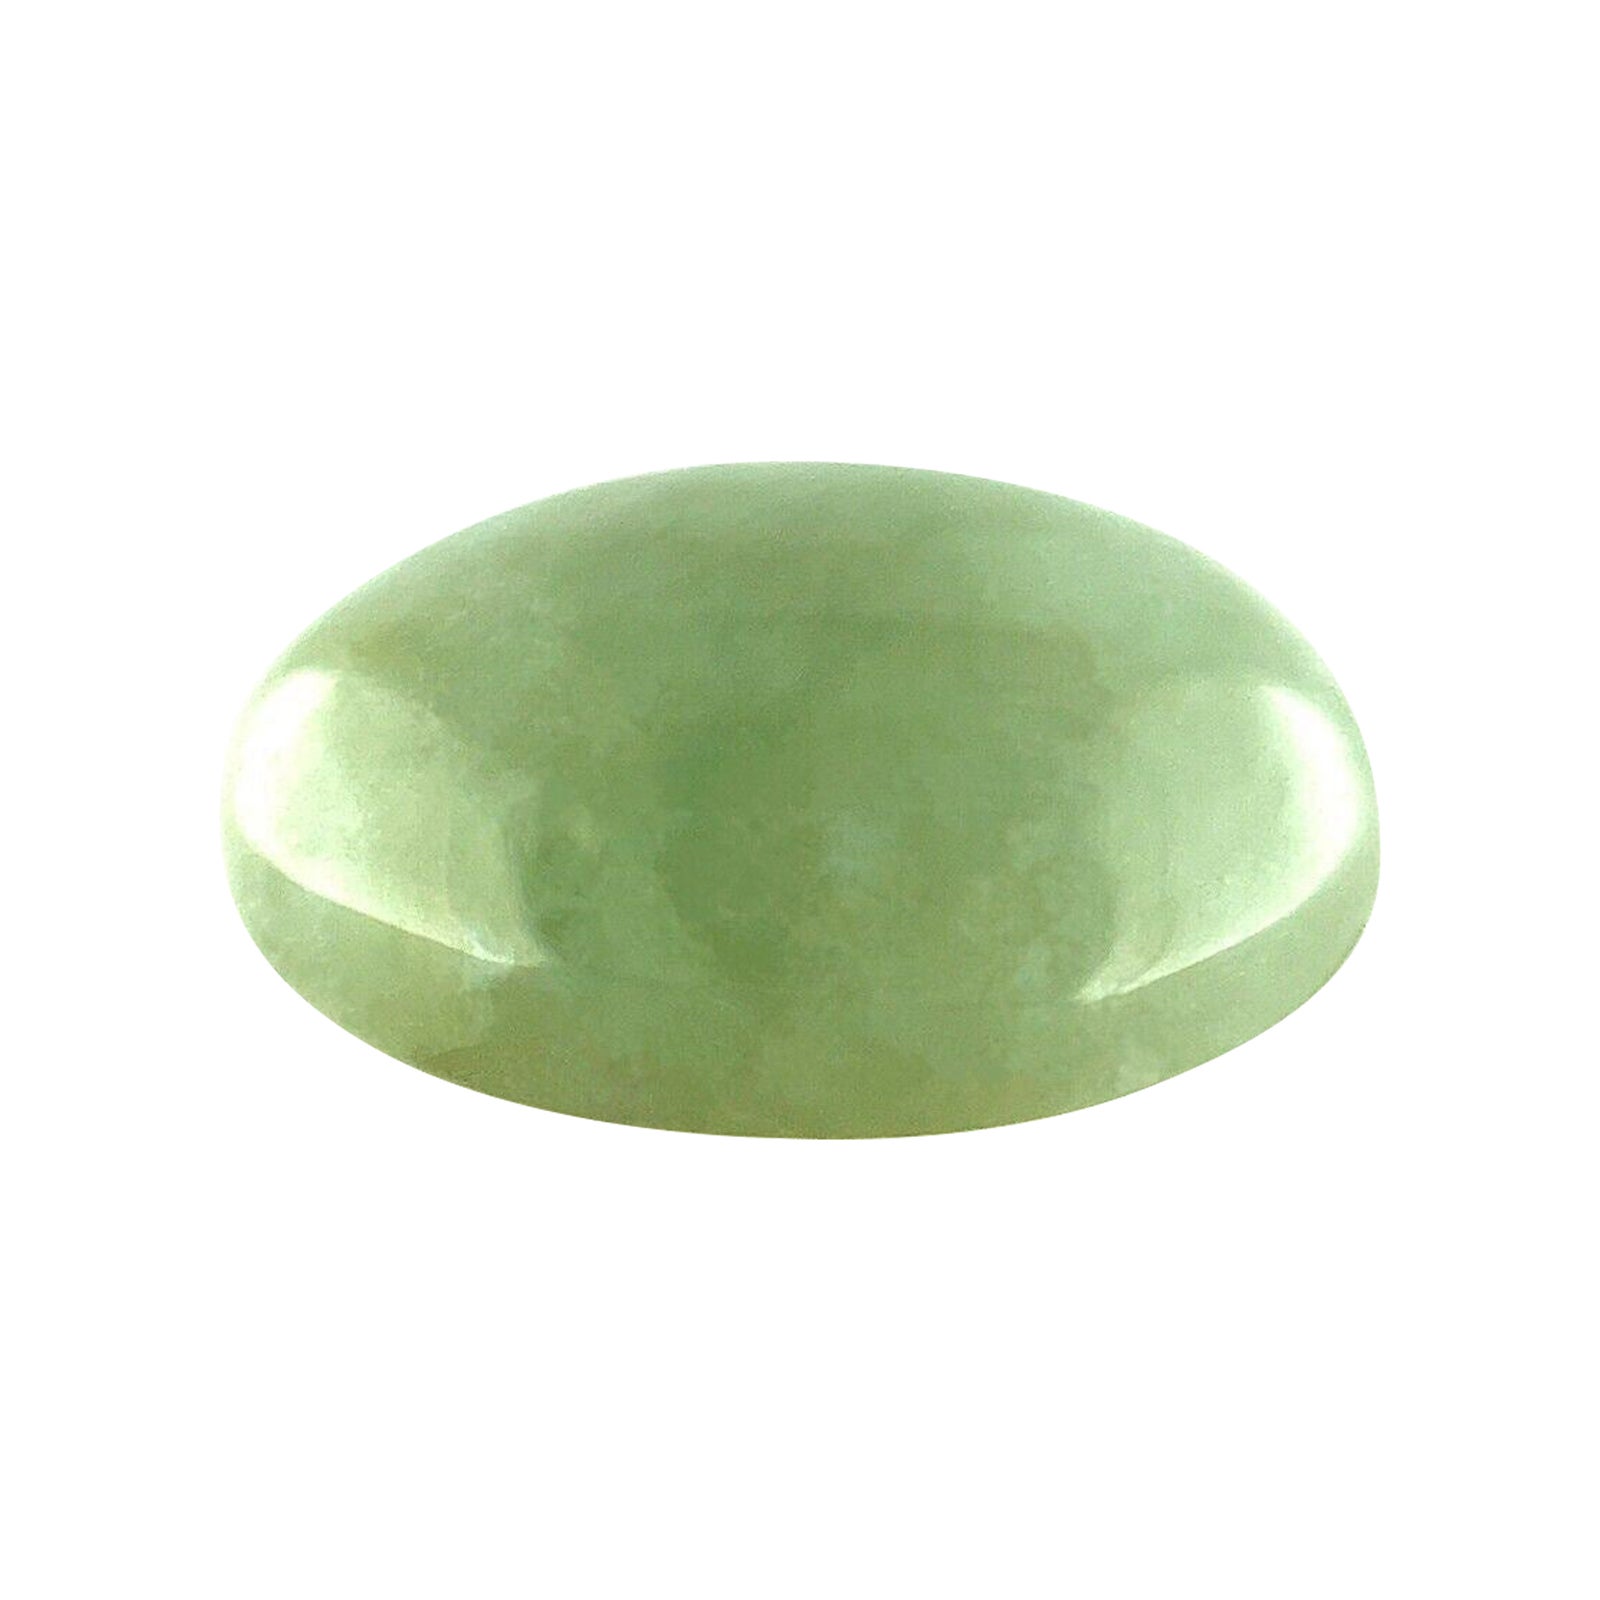 8.10 Carat GIA Certified Grey Green Jadeite Jade ‘A’ Grade Oval Cabochon For Sale